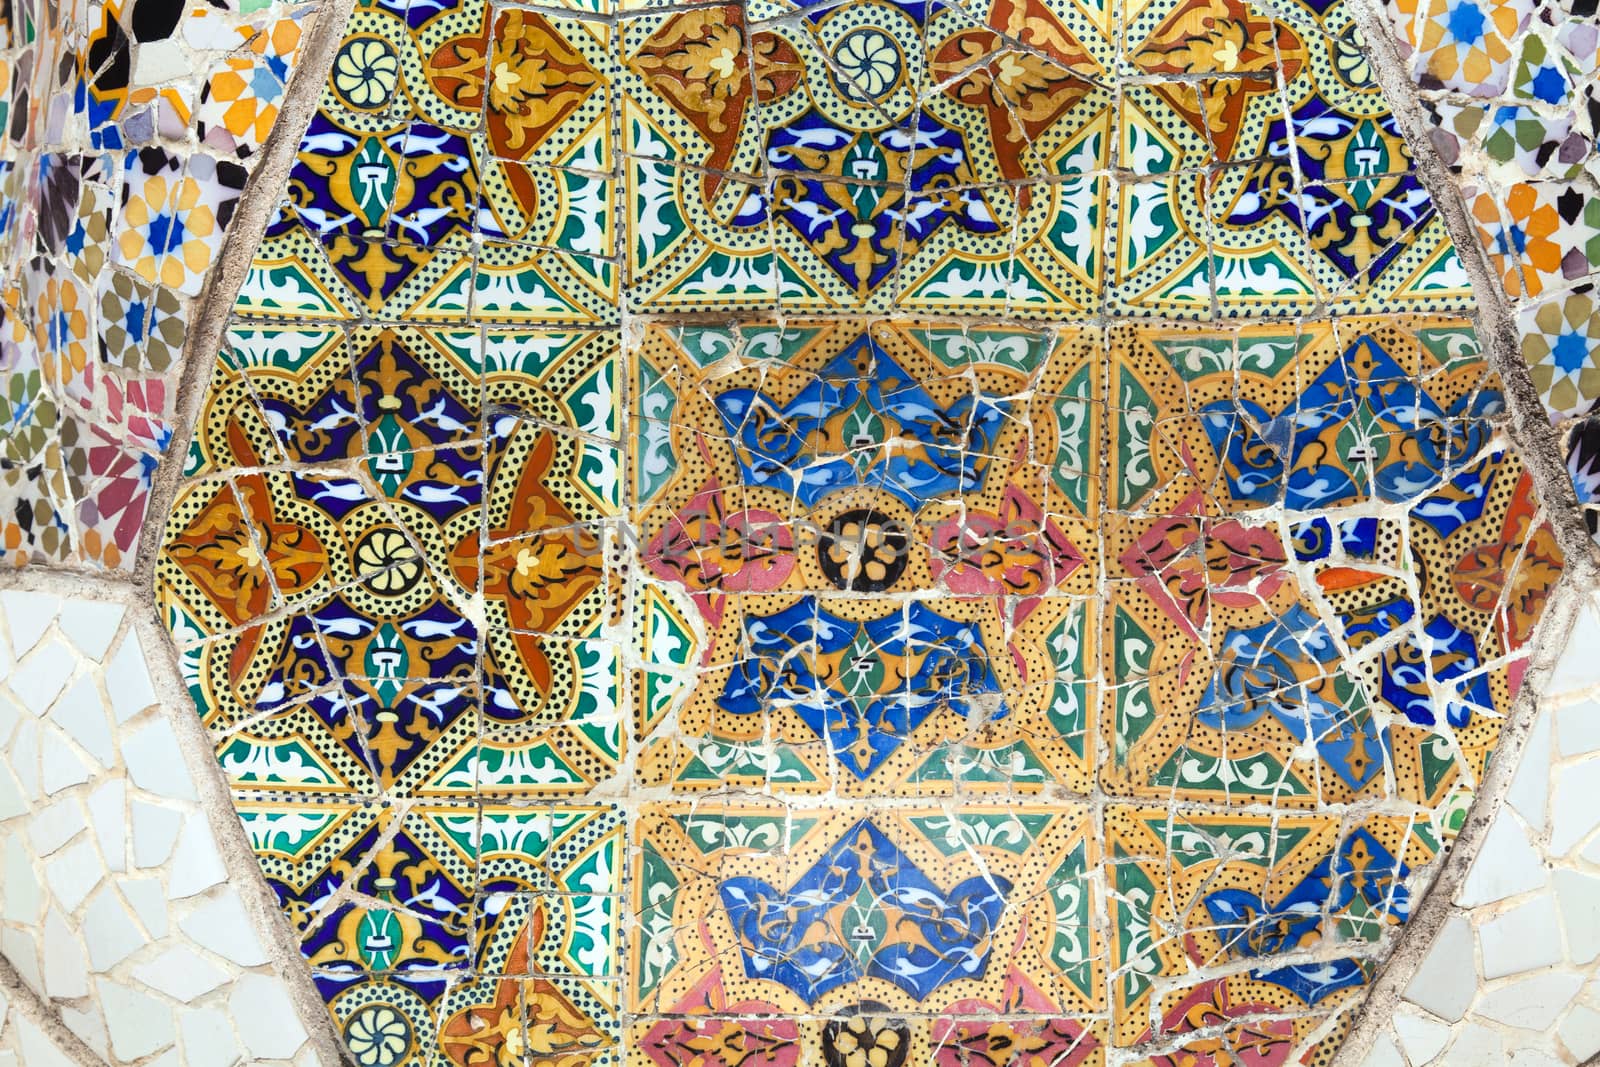 Old ceramic tiles in Park Guell - Barcelona, Spain by Portokalis